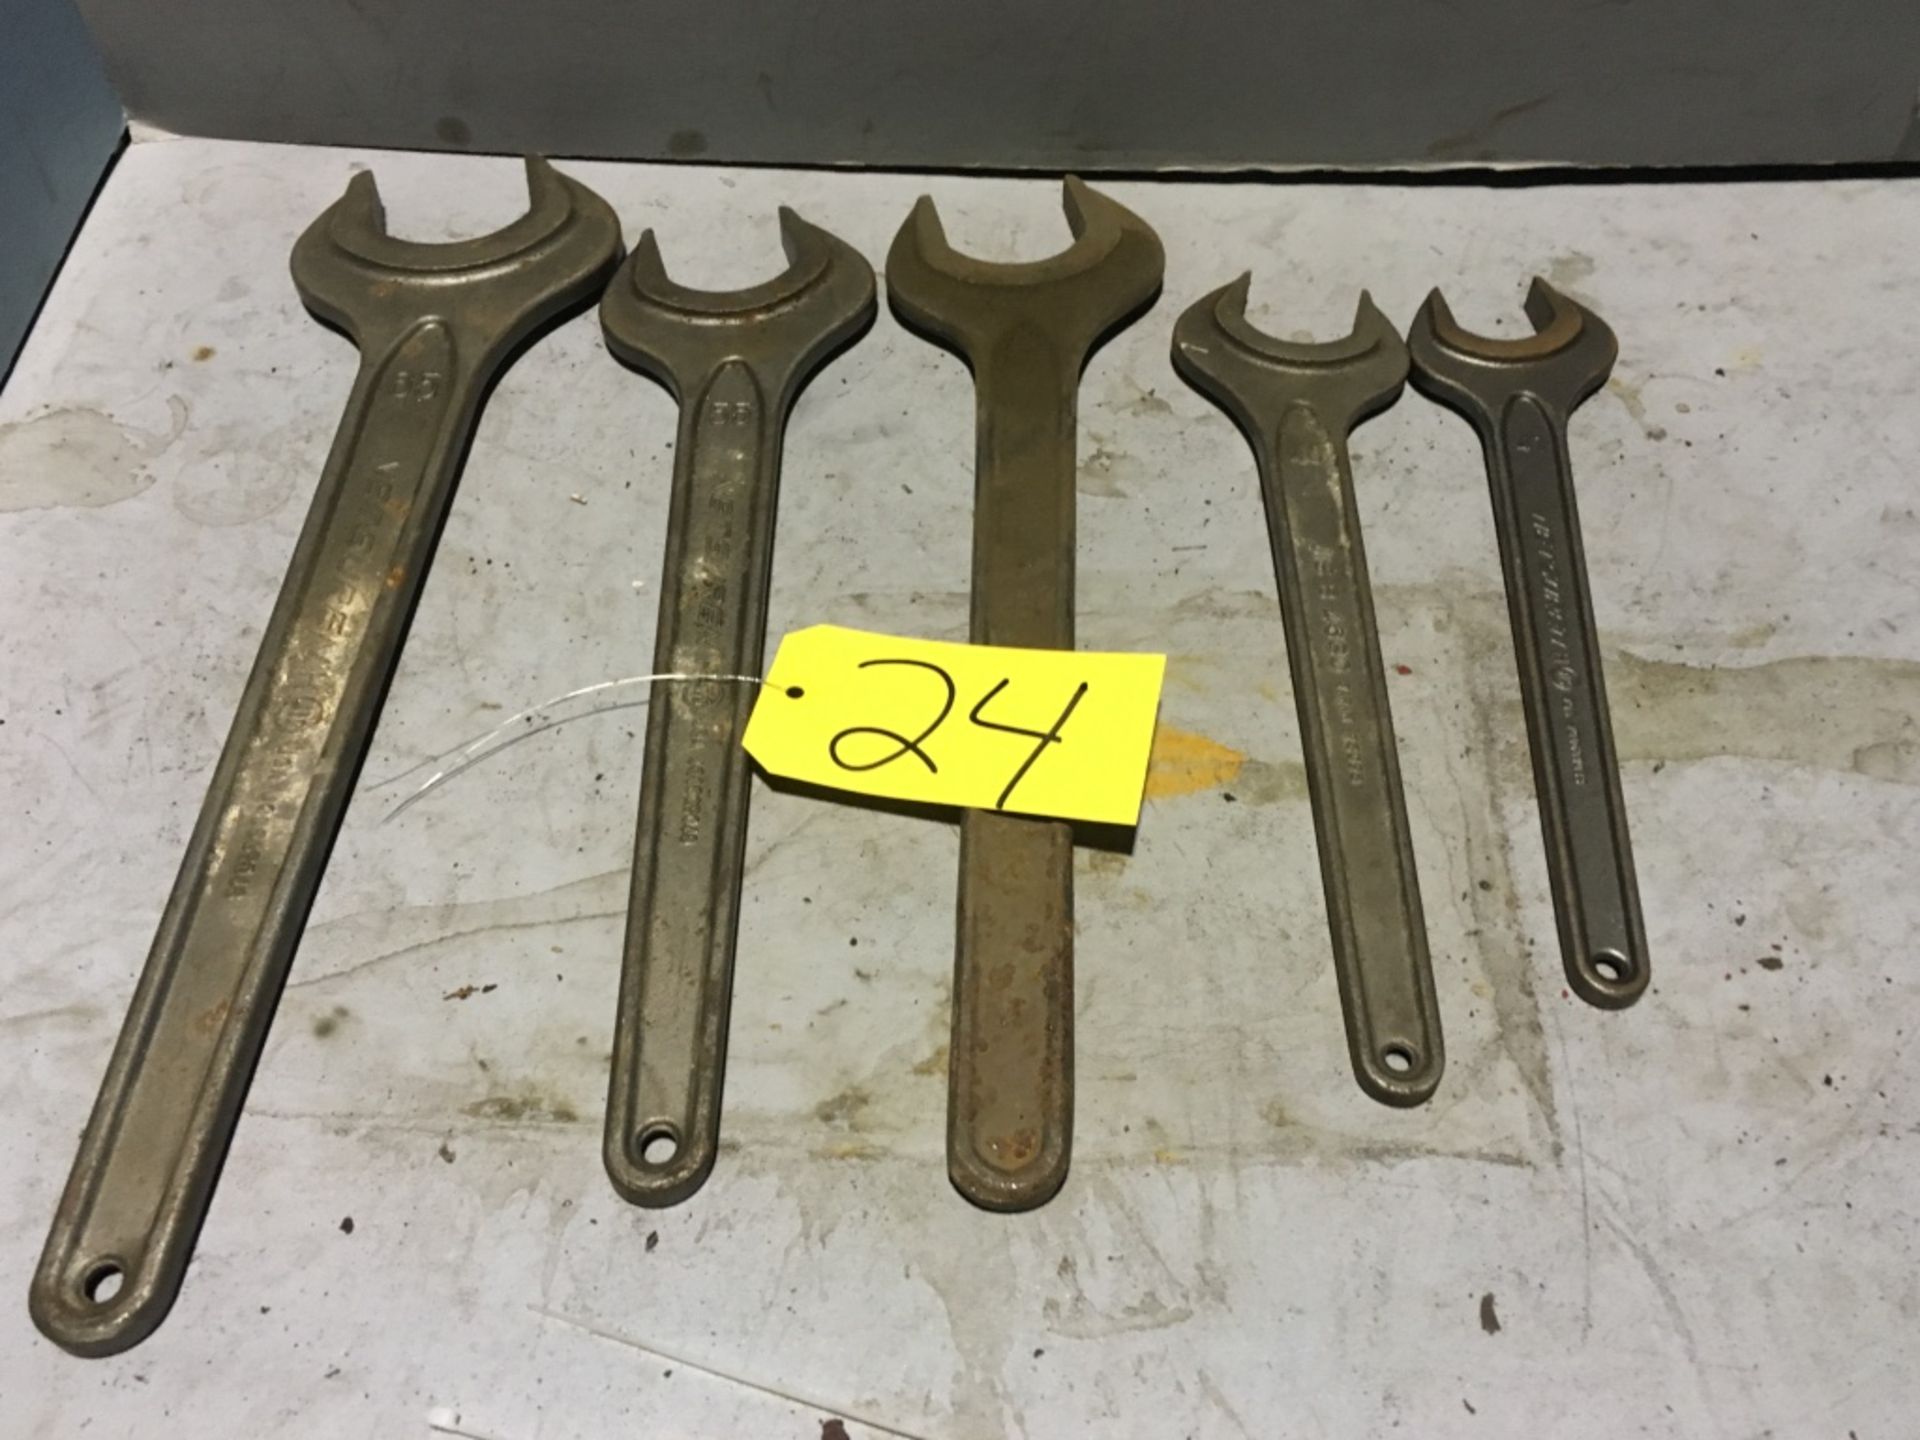 Approximately (5) open end wrenches.